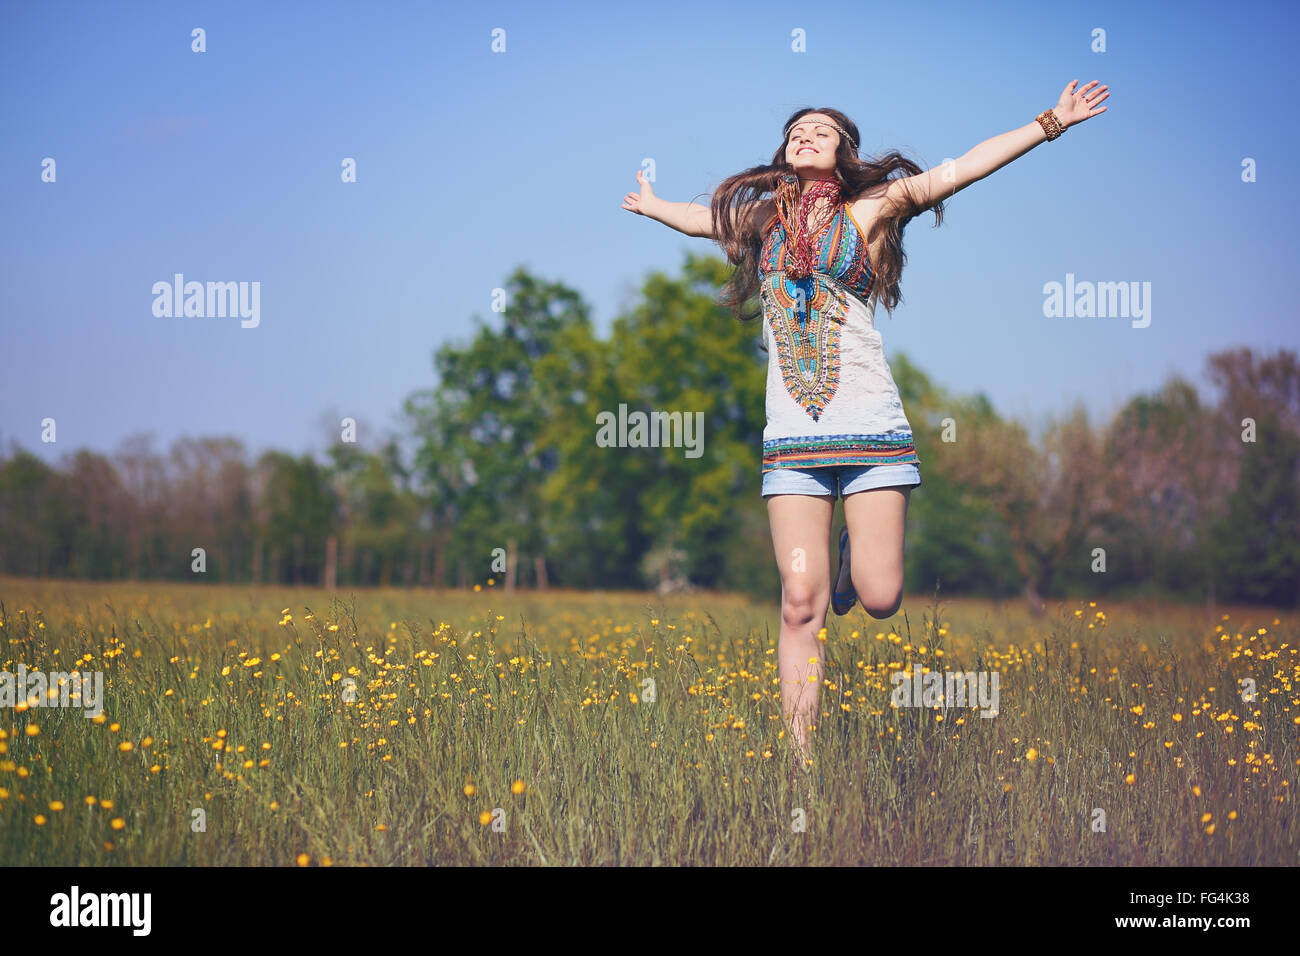 Happy and smiling hippie woman jumps in a summer field . Vintage photo effect Stock Photo